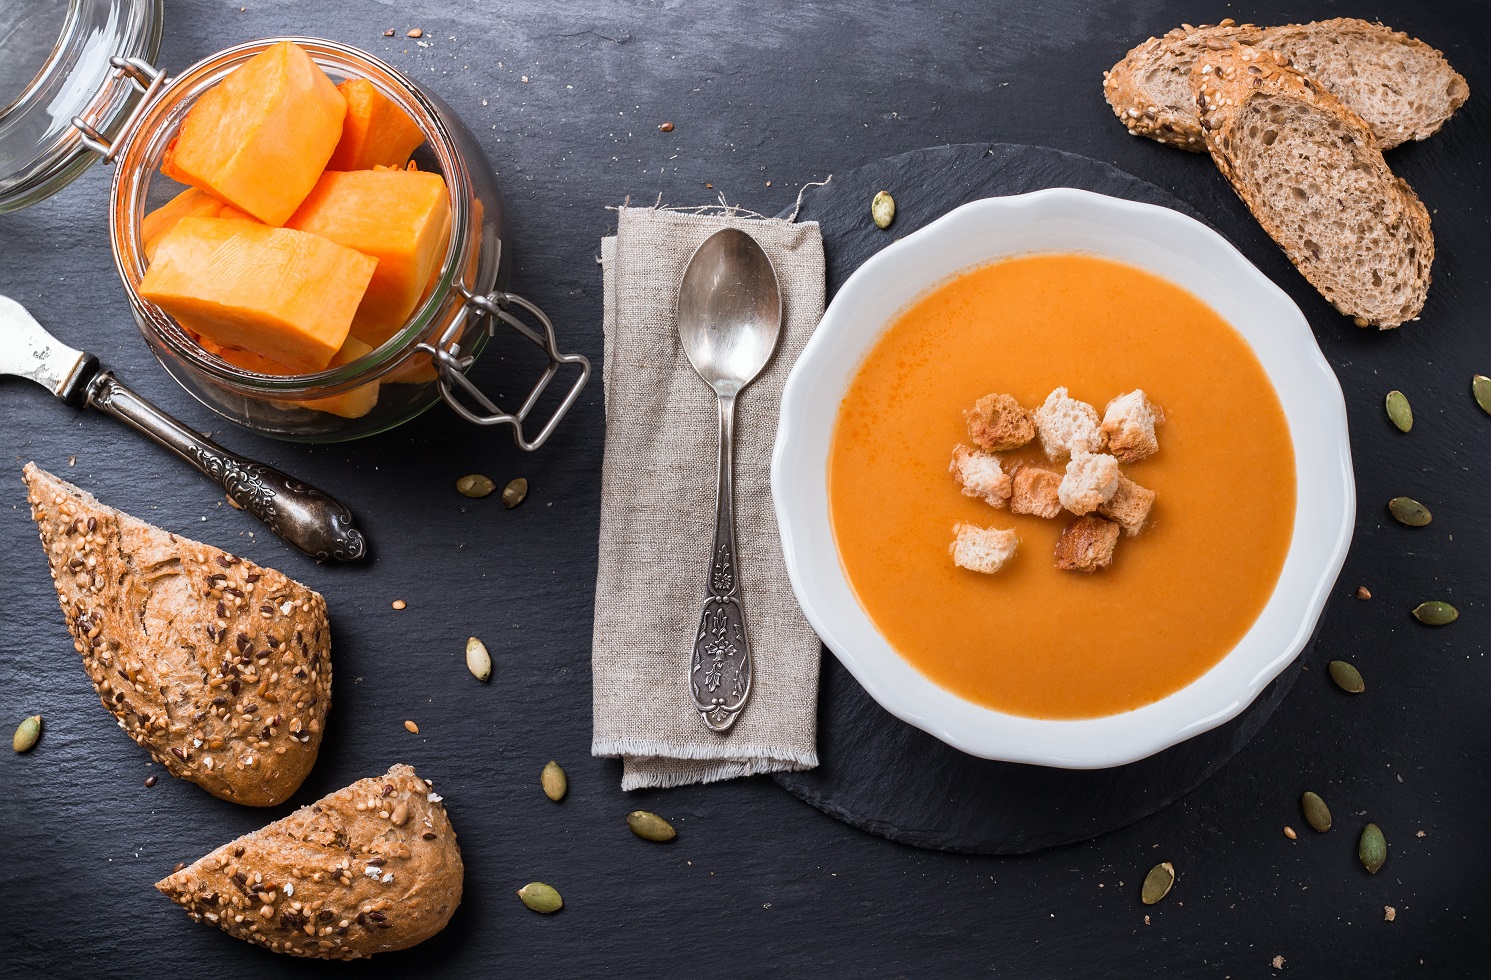 Pumpkin soup in a white bowl on table